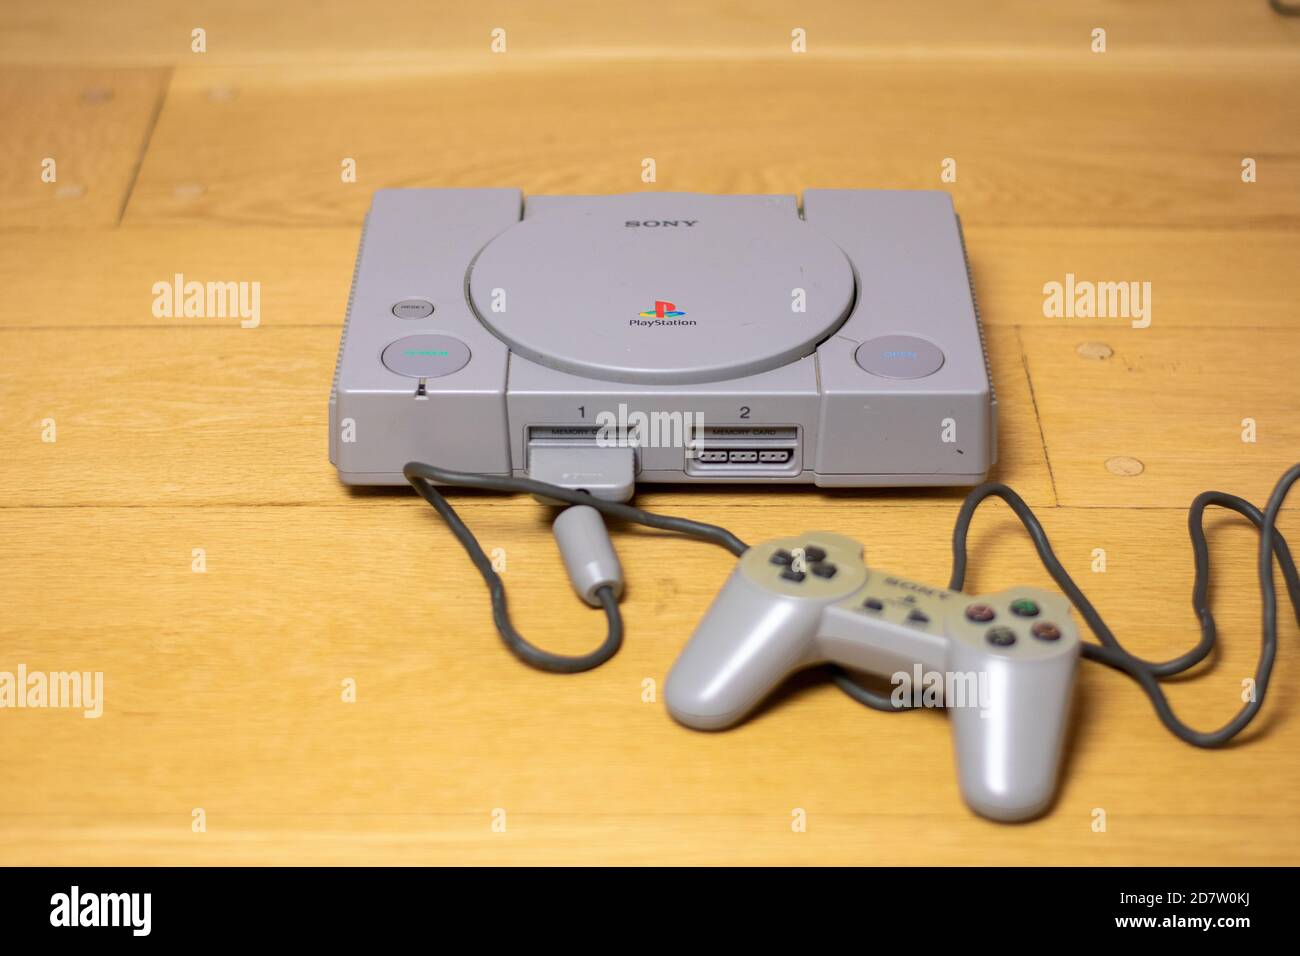 Displai Pro: PSX Sony PlayStation Classic (Mini) Display – Rose Colored  Gaming